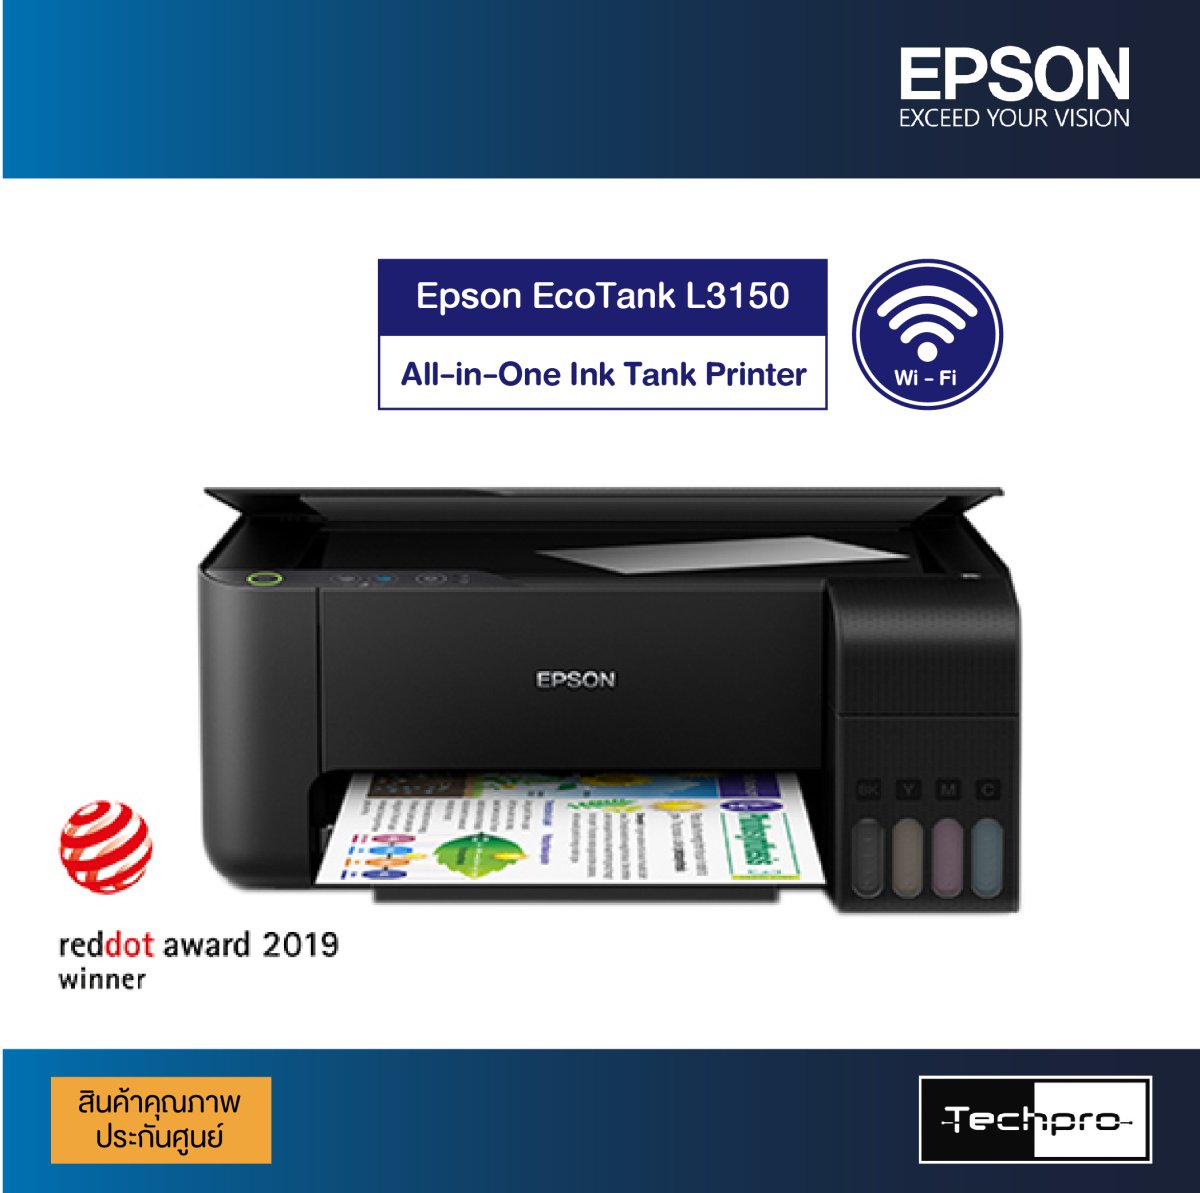 Epson Ecotank L3150 Wi Fi All In One Ink Tank Printer Ink Tank System 0230